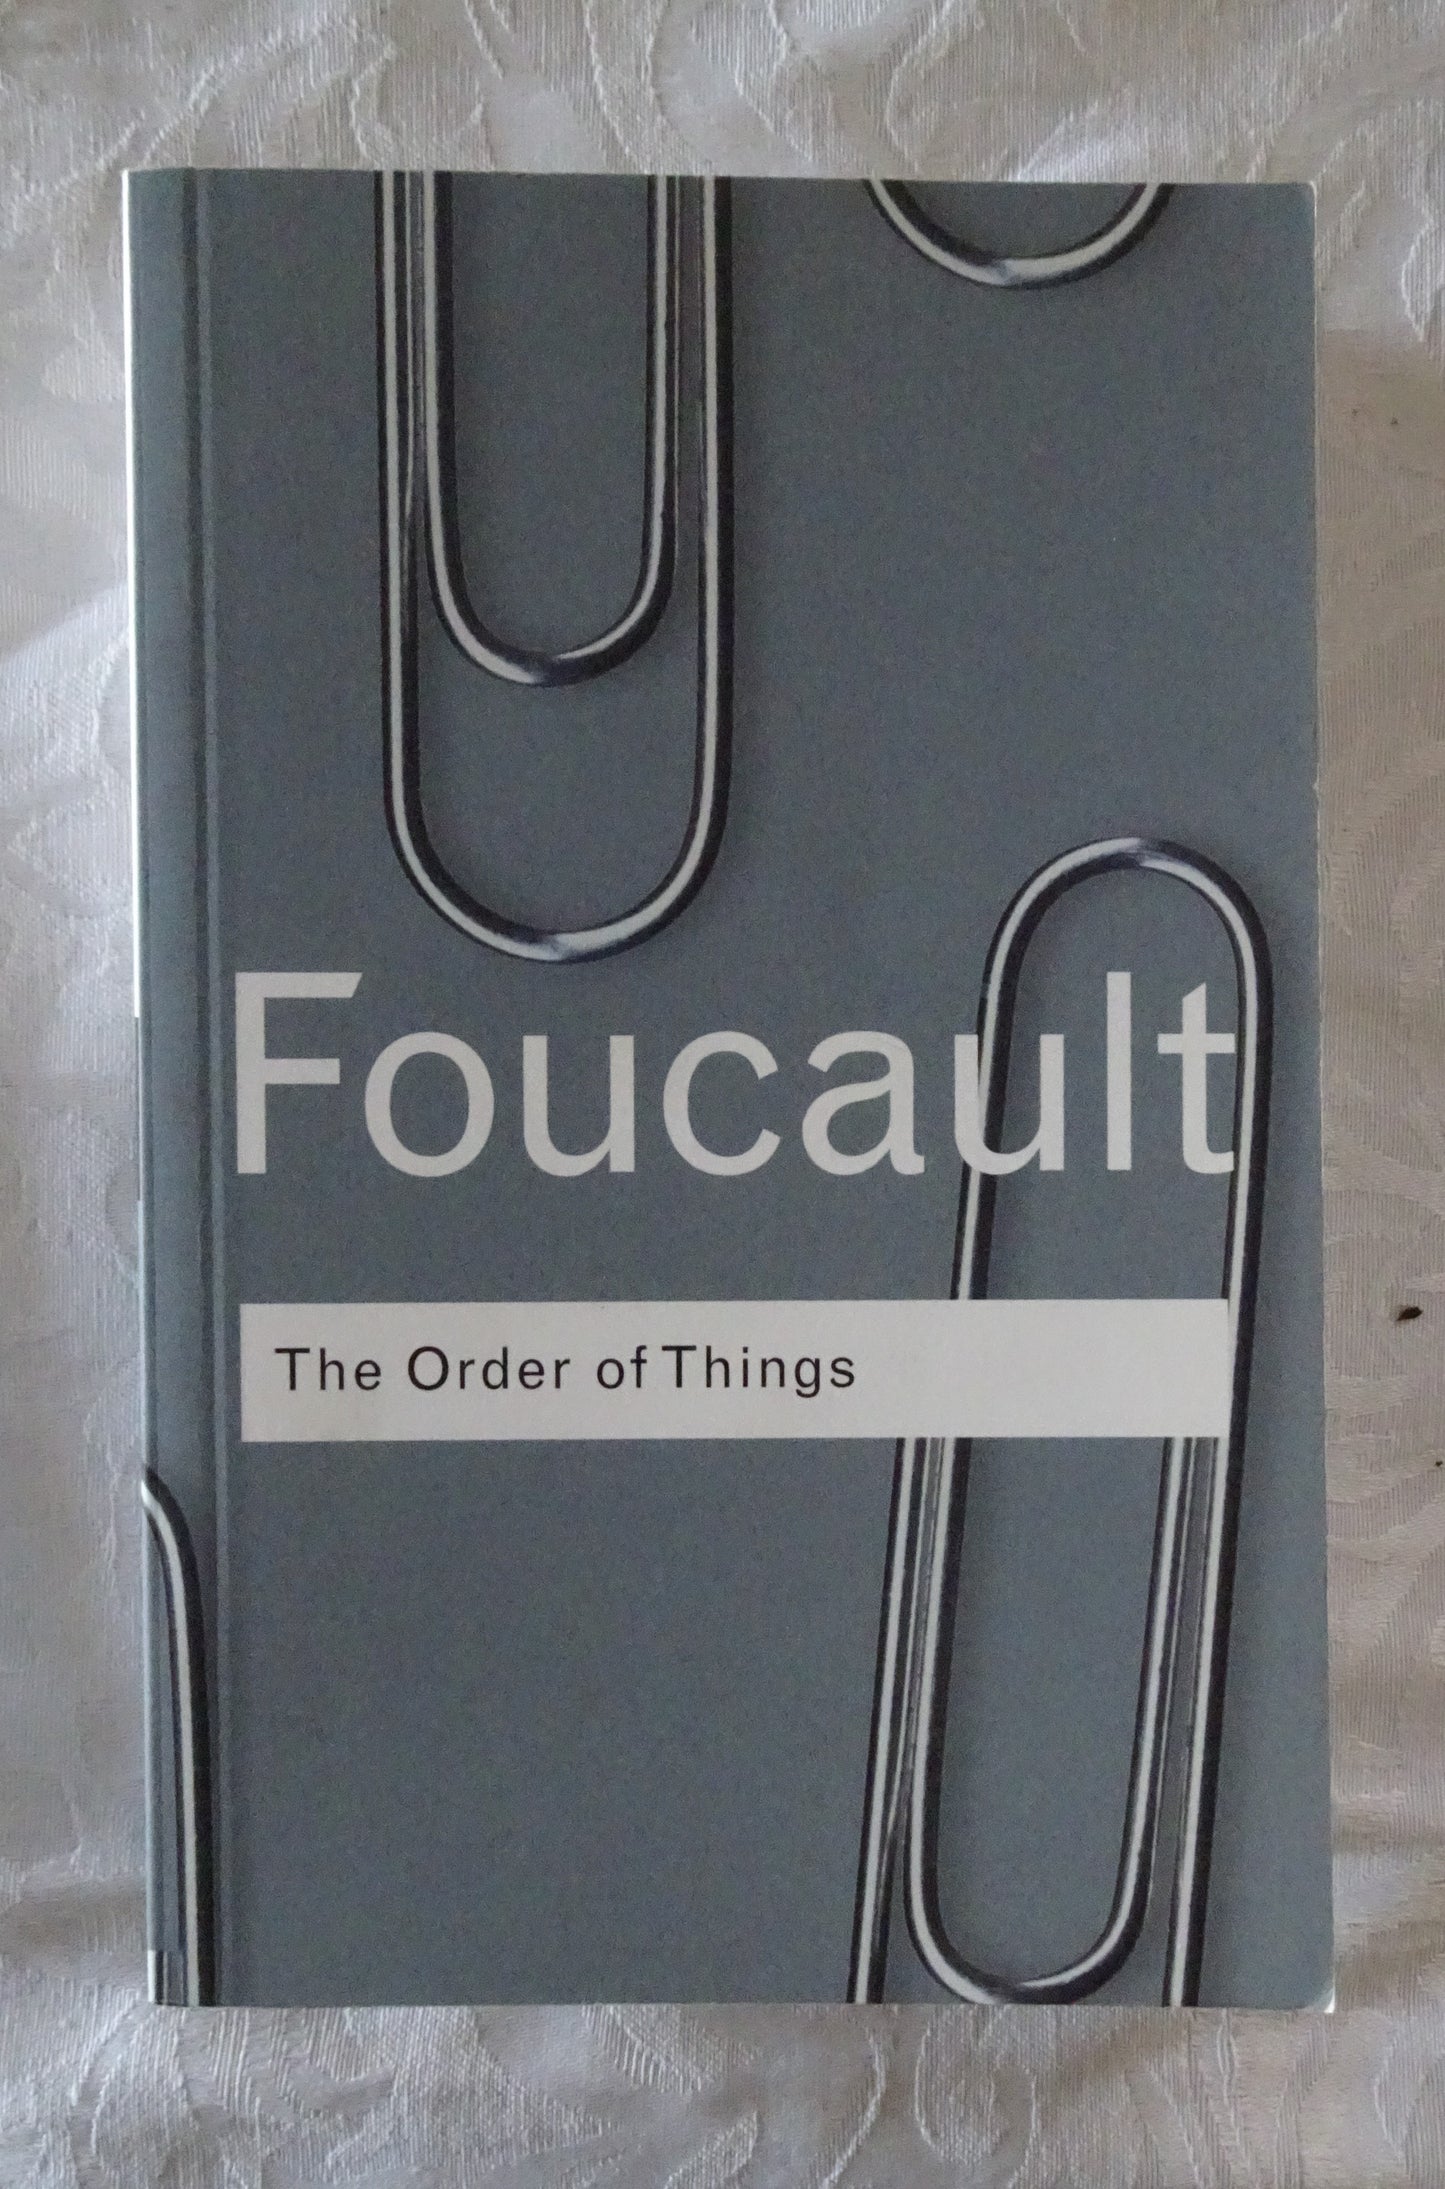 The Order of Things by Michael Foucault